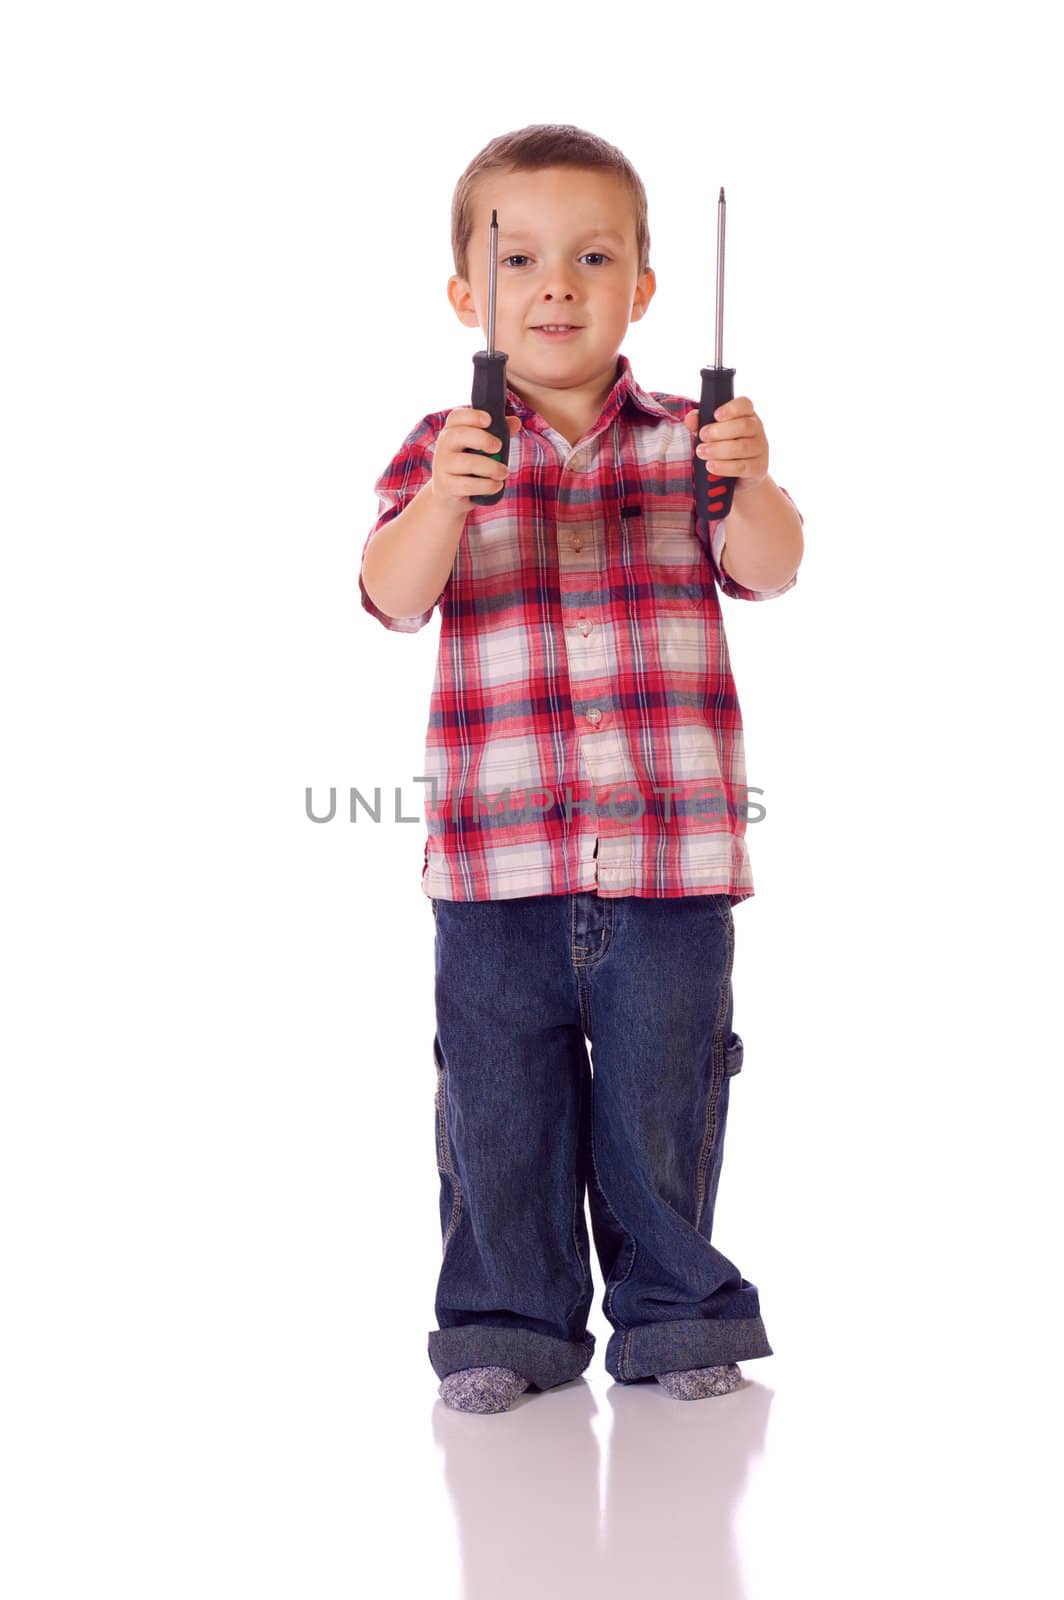 Cute little boy with two screwdrivers